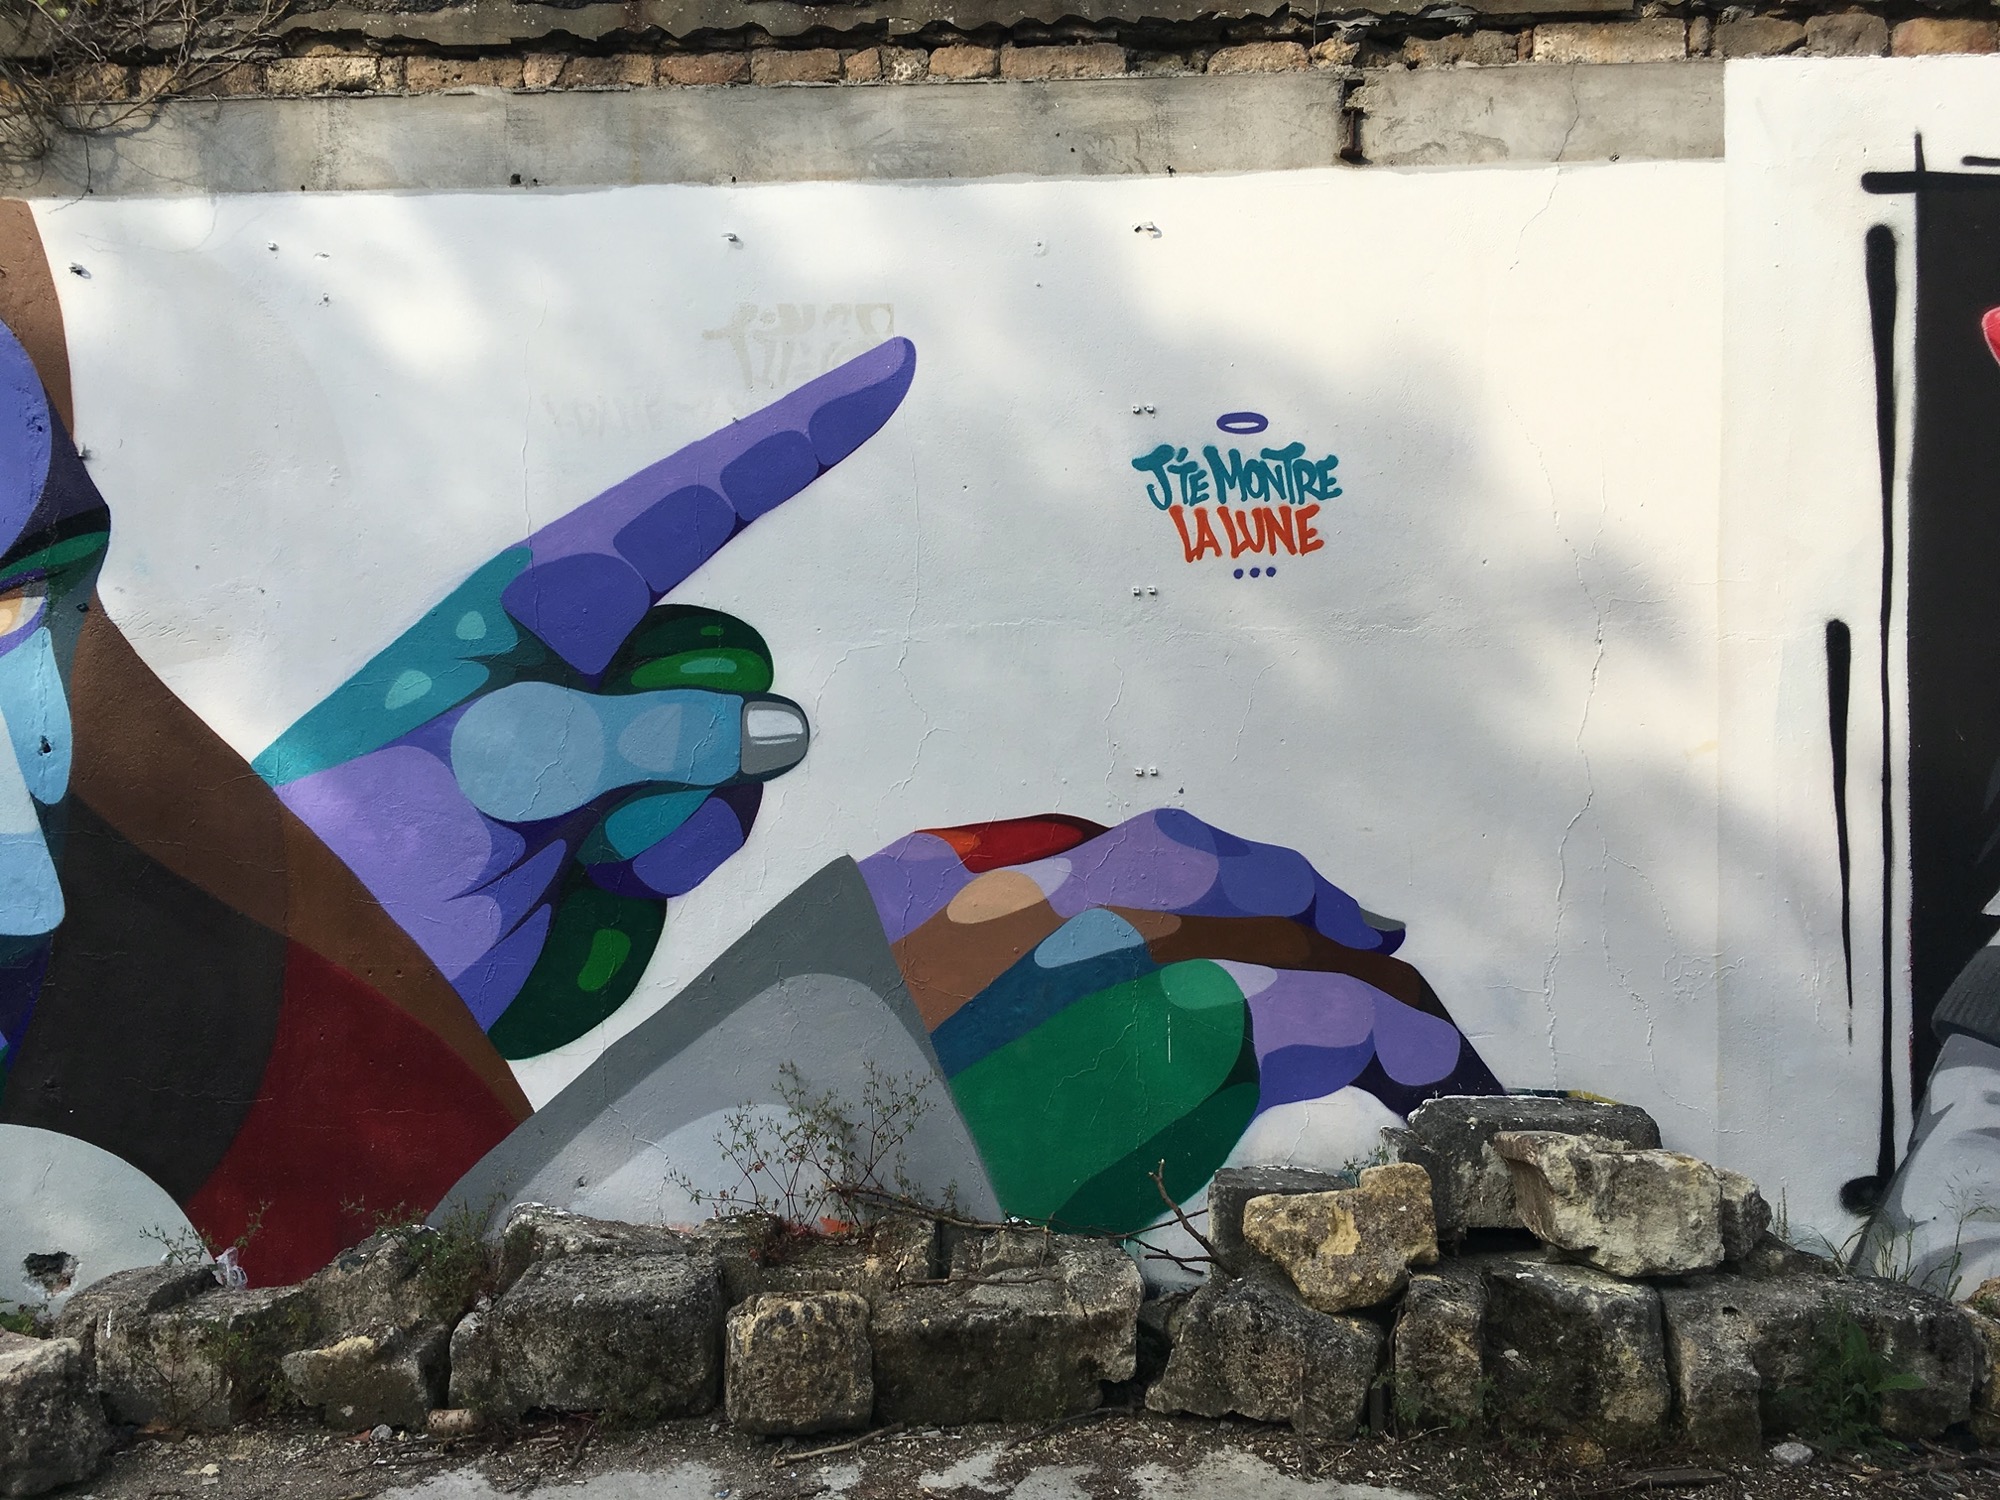 Graffiti 352  by the artist Alber captured by Julien in Bordeaux France